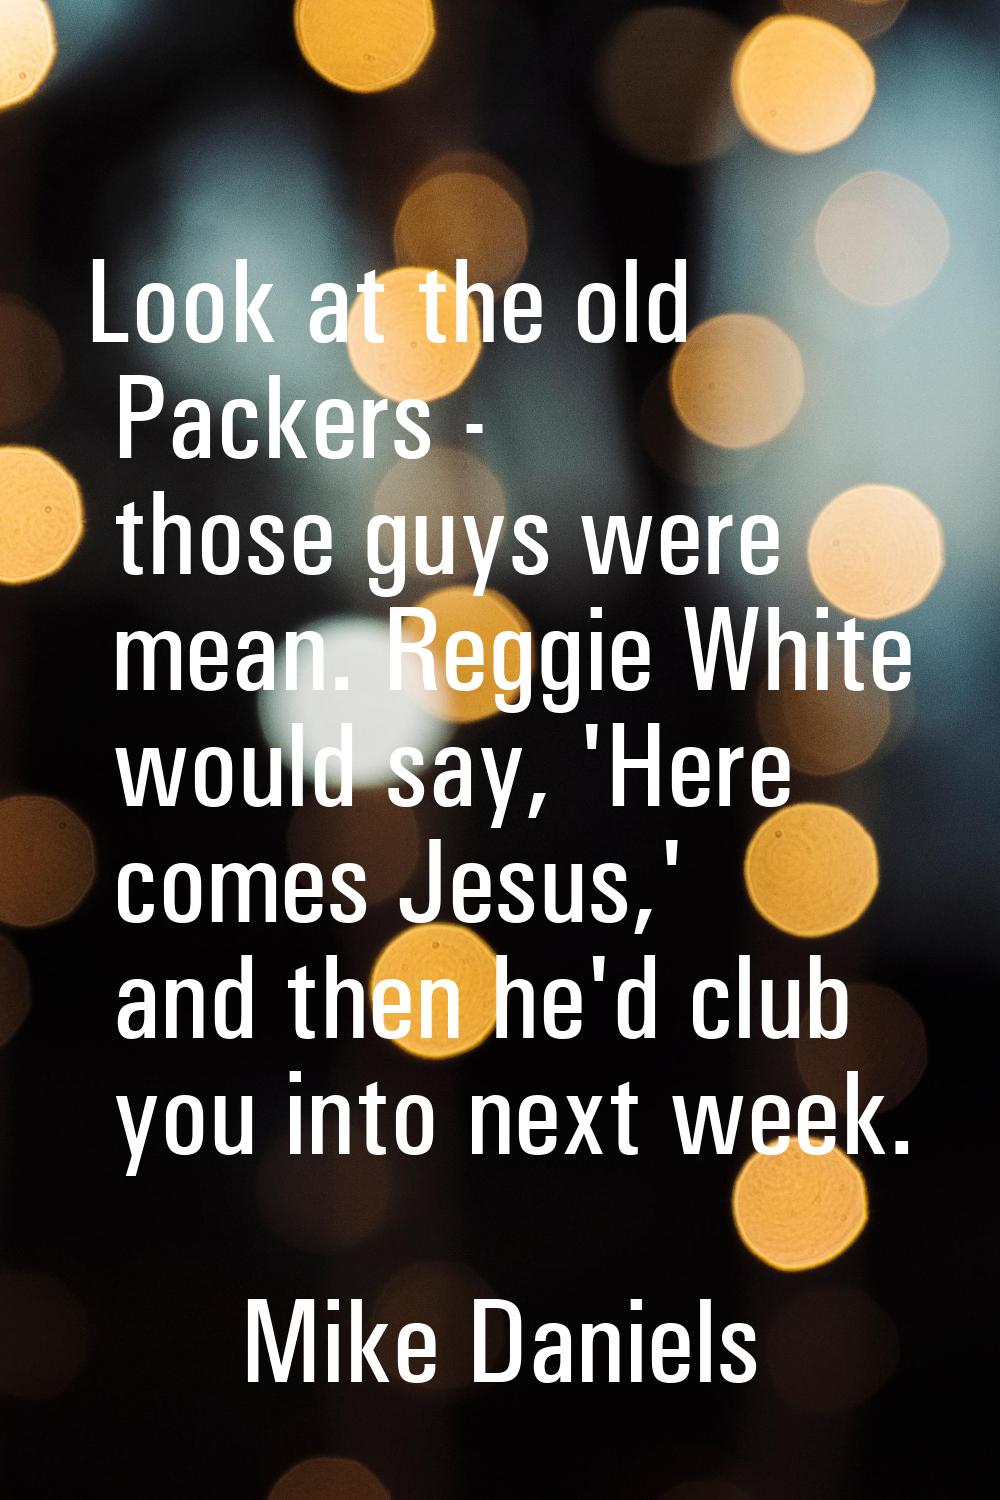 Look at the old Packers - those guys were mean. Reggie White would say, 'Here comes Jesus,' and the